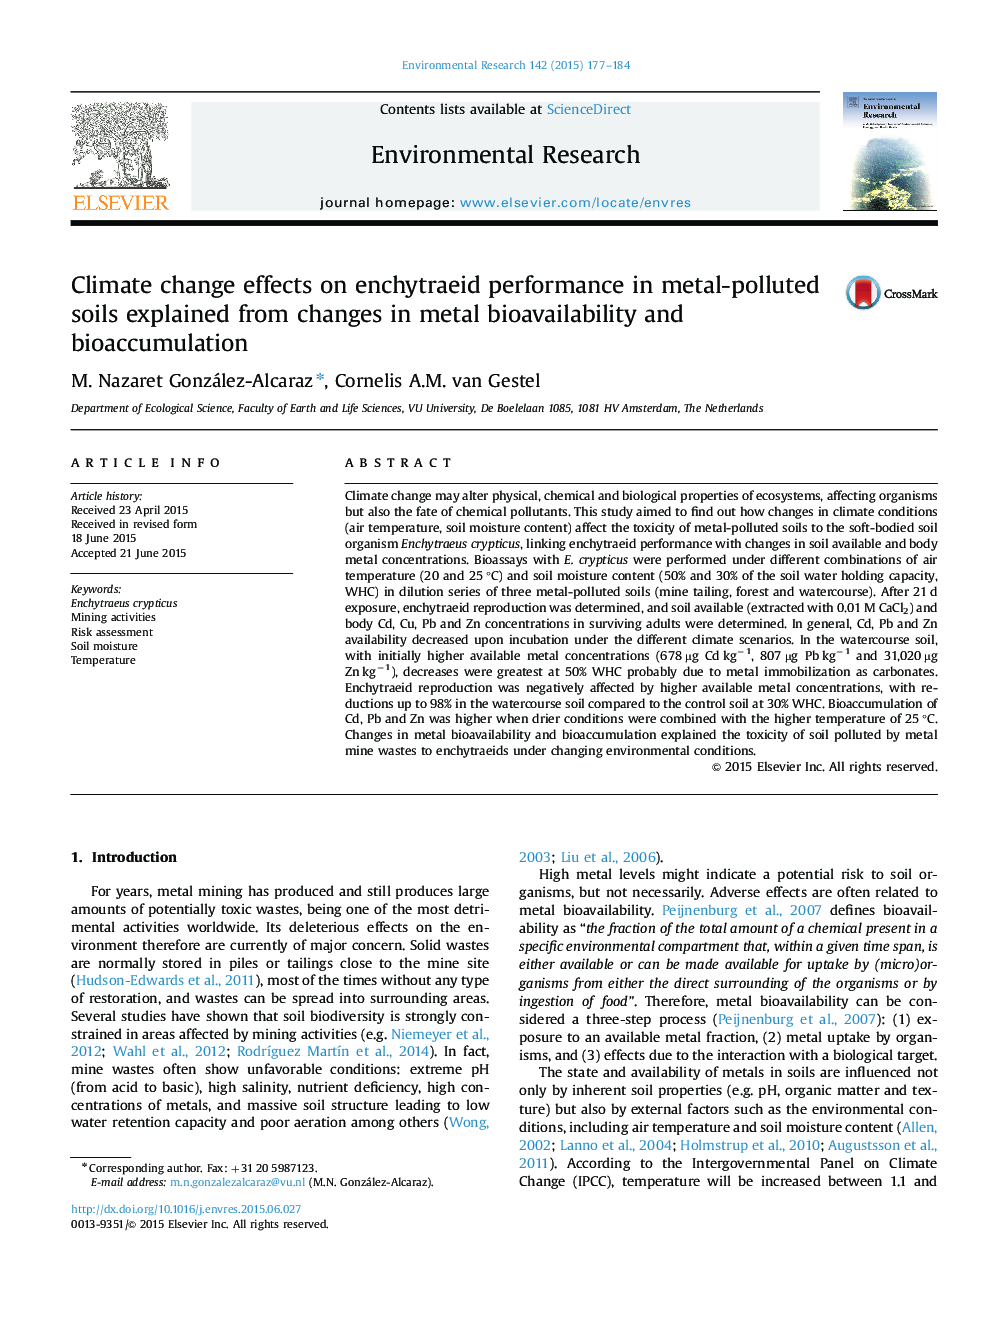 Climate change effects on enchytraeid performance in metal-polluted soils explained from changes in metal bioavailability and bioaccumulation